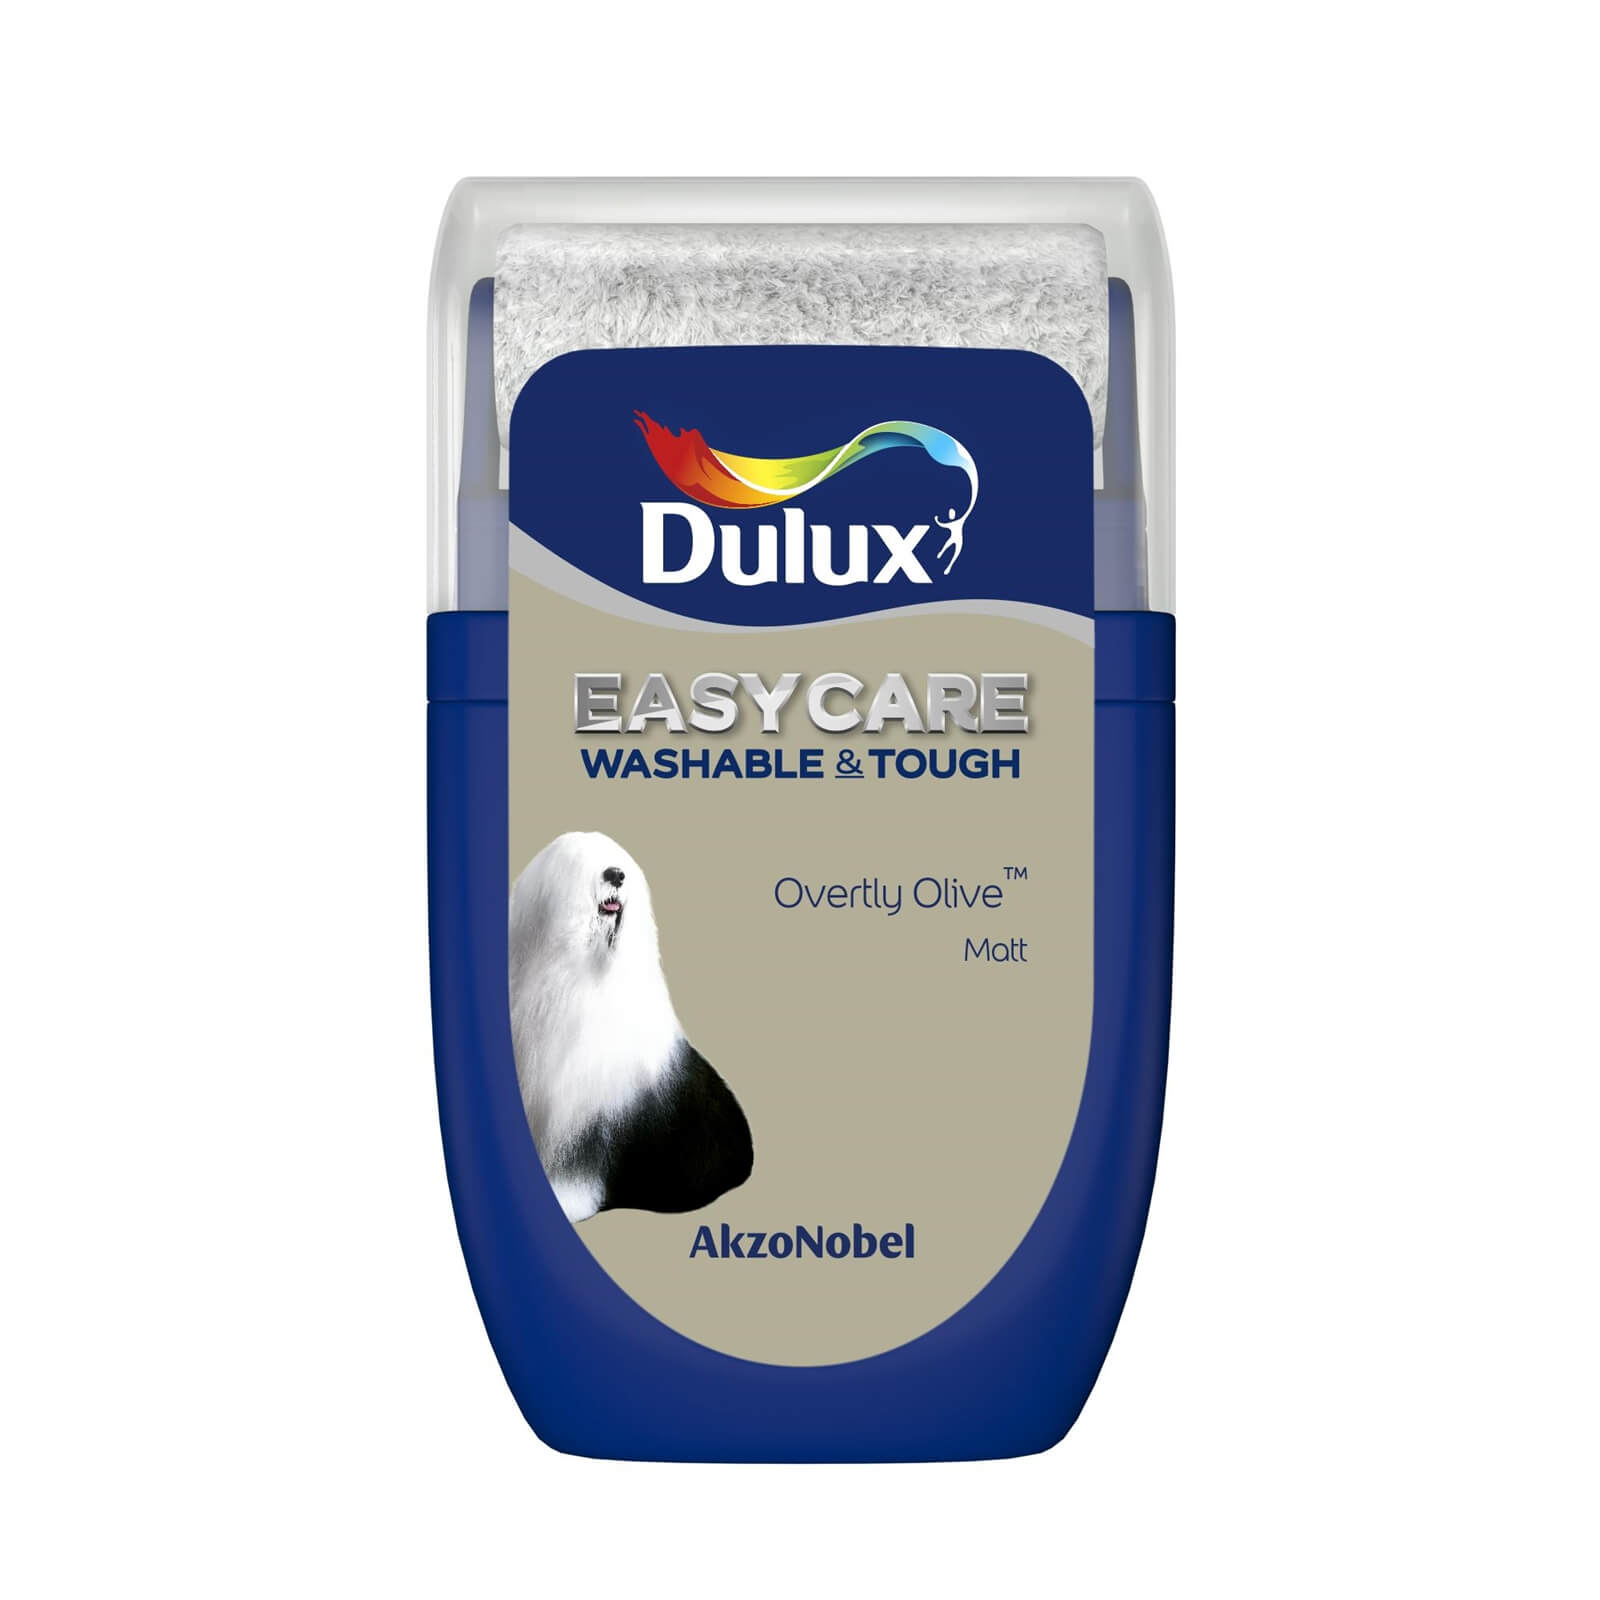 Dulux Easycare Washable & Tough Paint Overtly Olive - Tester 30ml